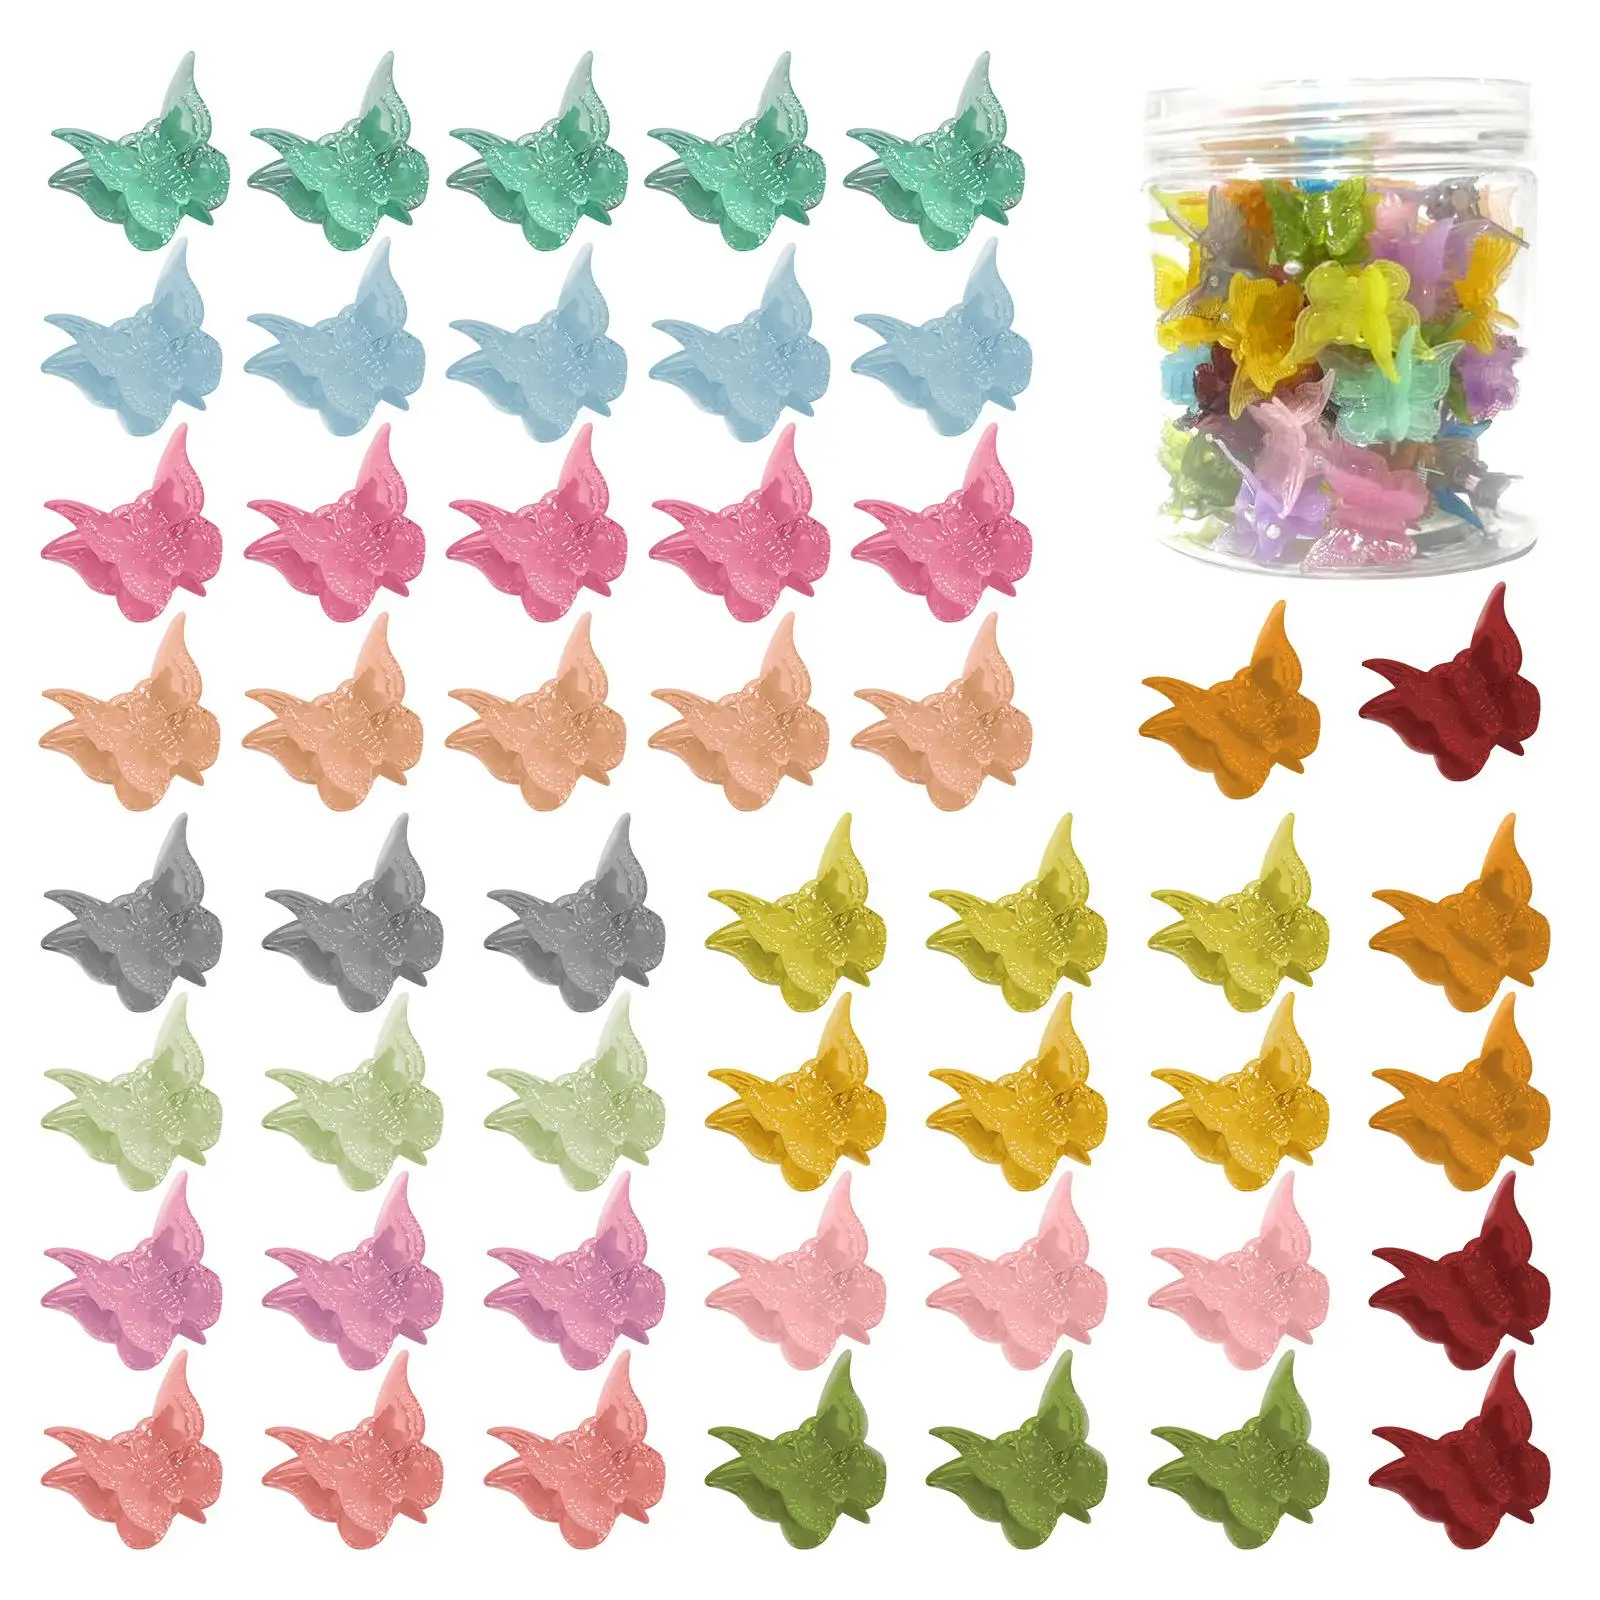 50 Pieces Butterfly Hair Clips with Box Package Assorted Colors Cute Mini Gifts Hair Claws Clips for School Kids Children Women